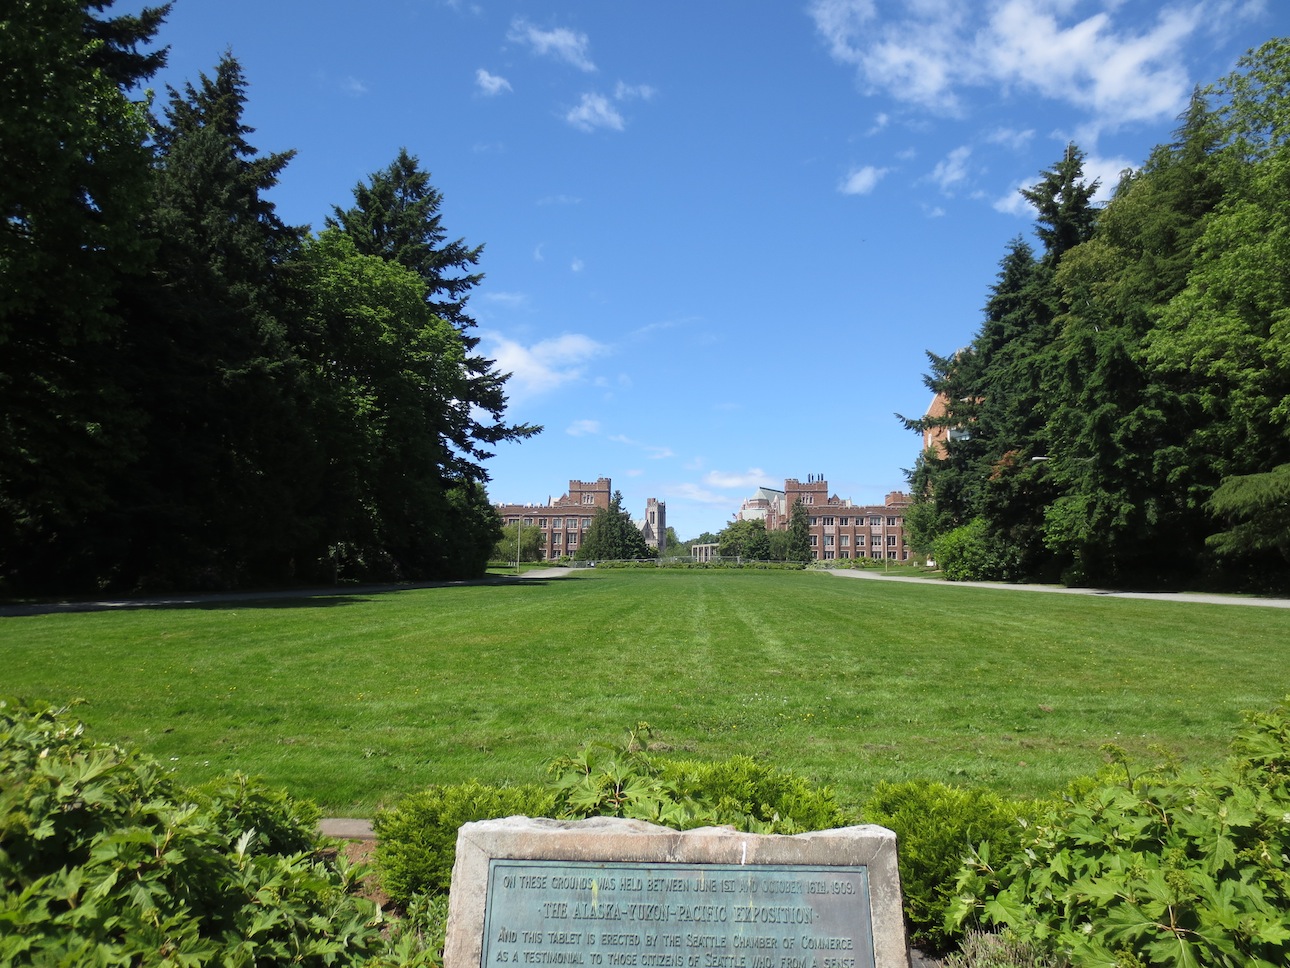 Plaque and field looking up at UW campus.